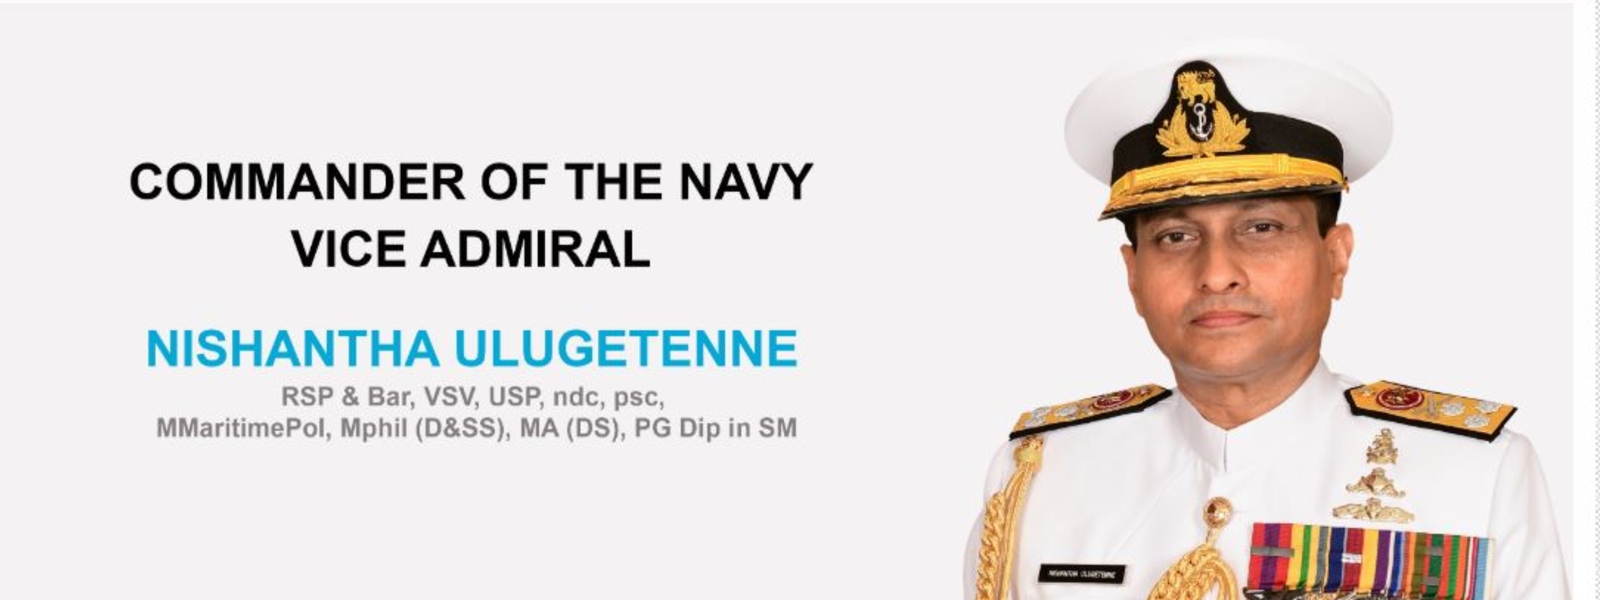 Vice Admiral Nishantha Ulugetenne appointed as new Sri Lanka Navy Commander